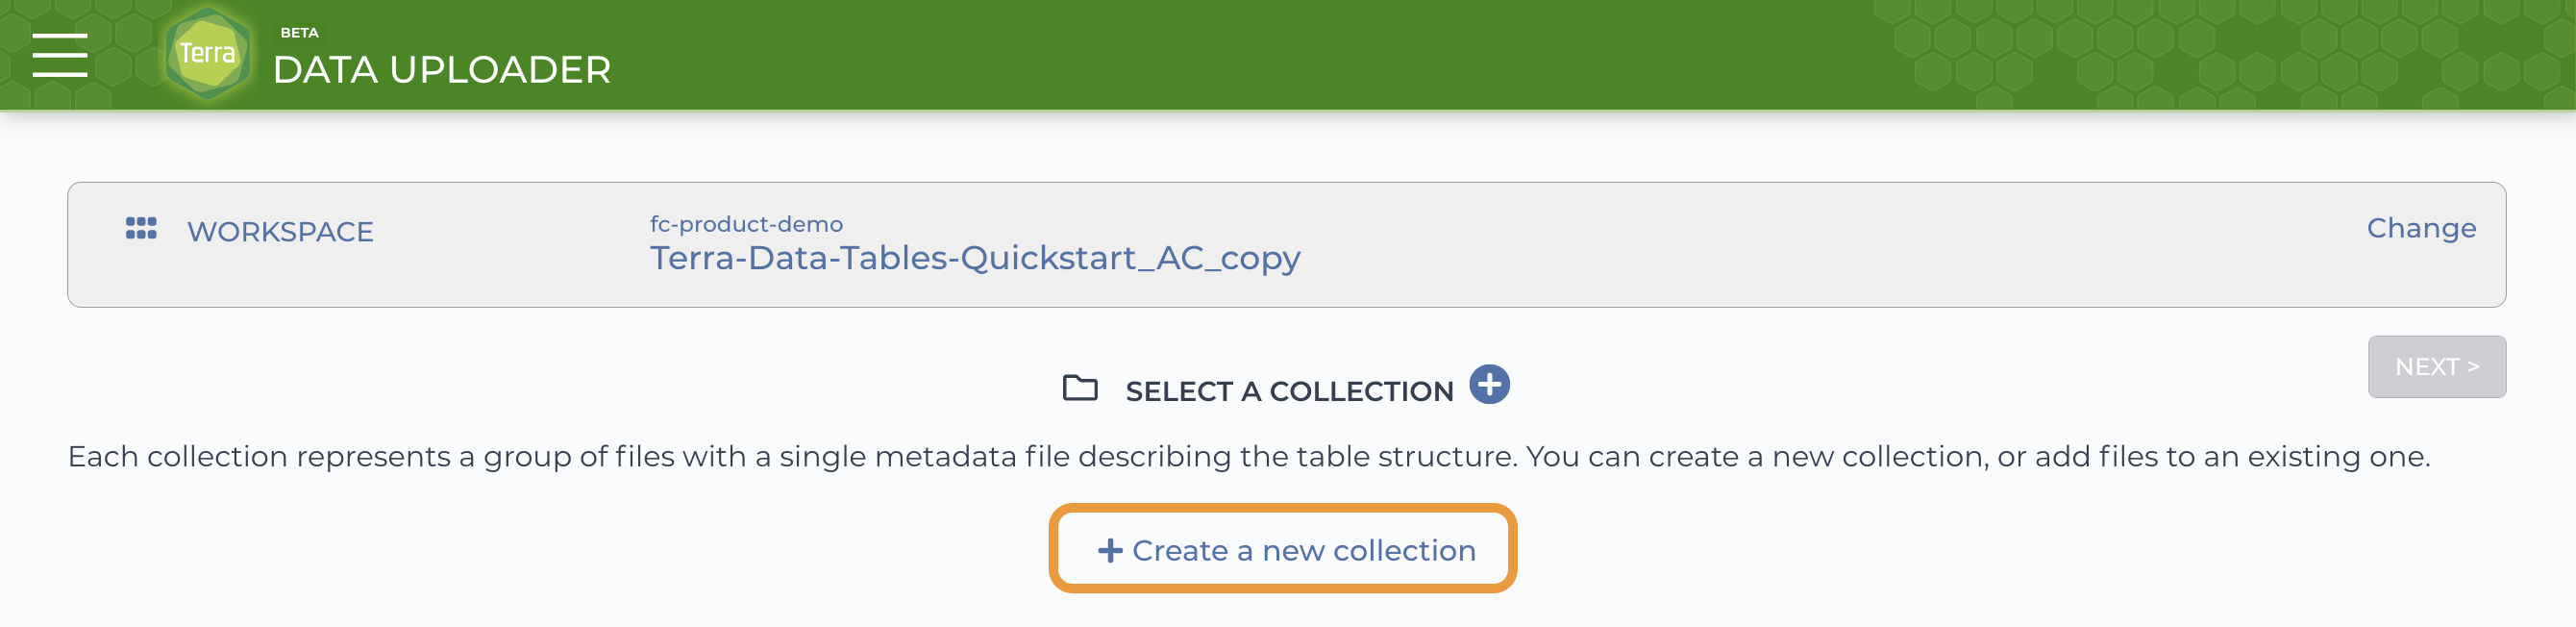 Screenshot of the Data Uploader page in Terra with the 'Create a new collection' option highlighted.